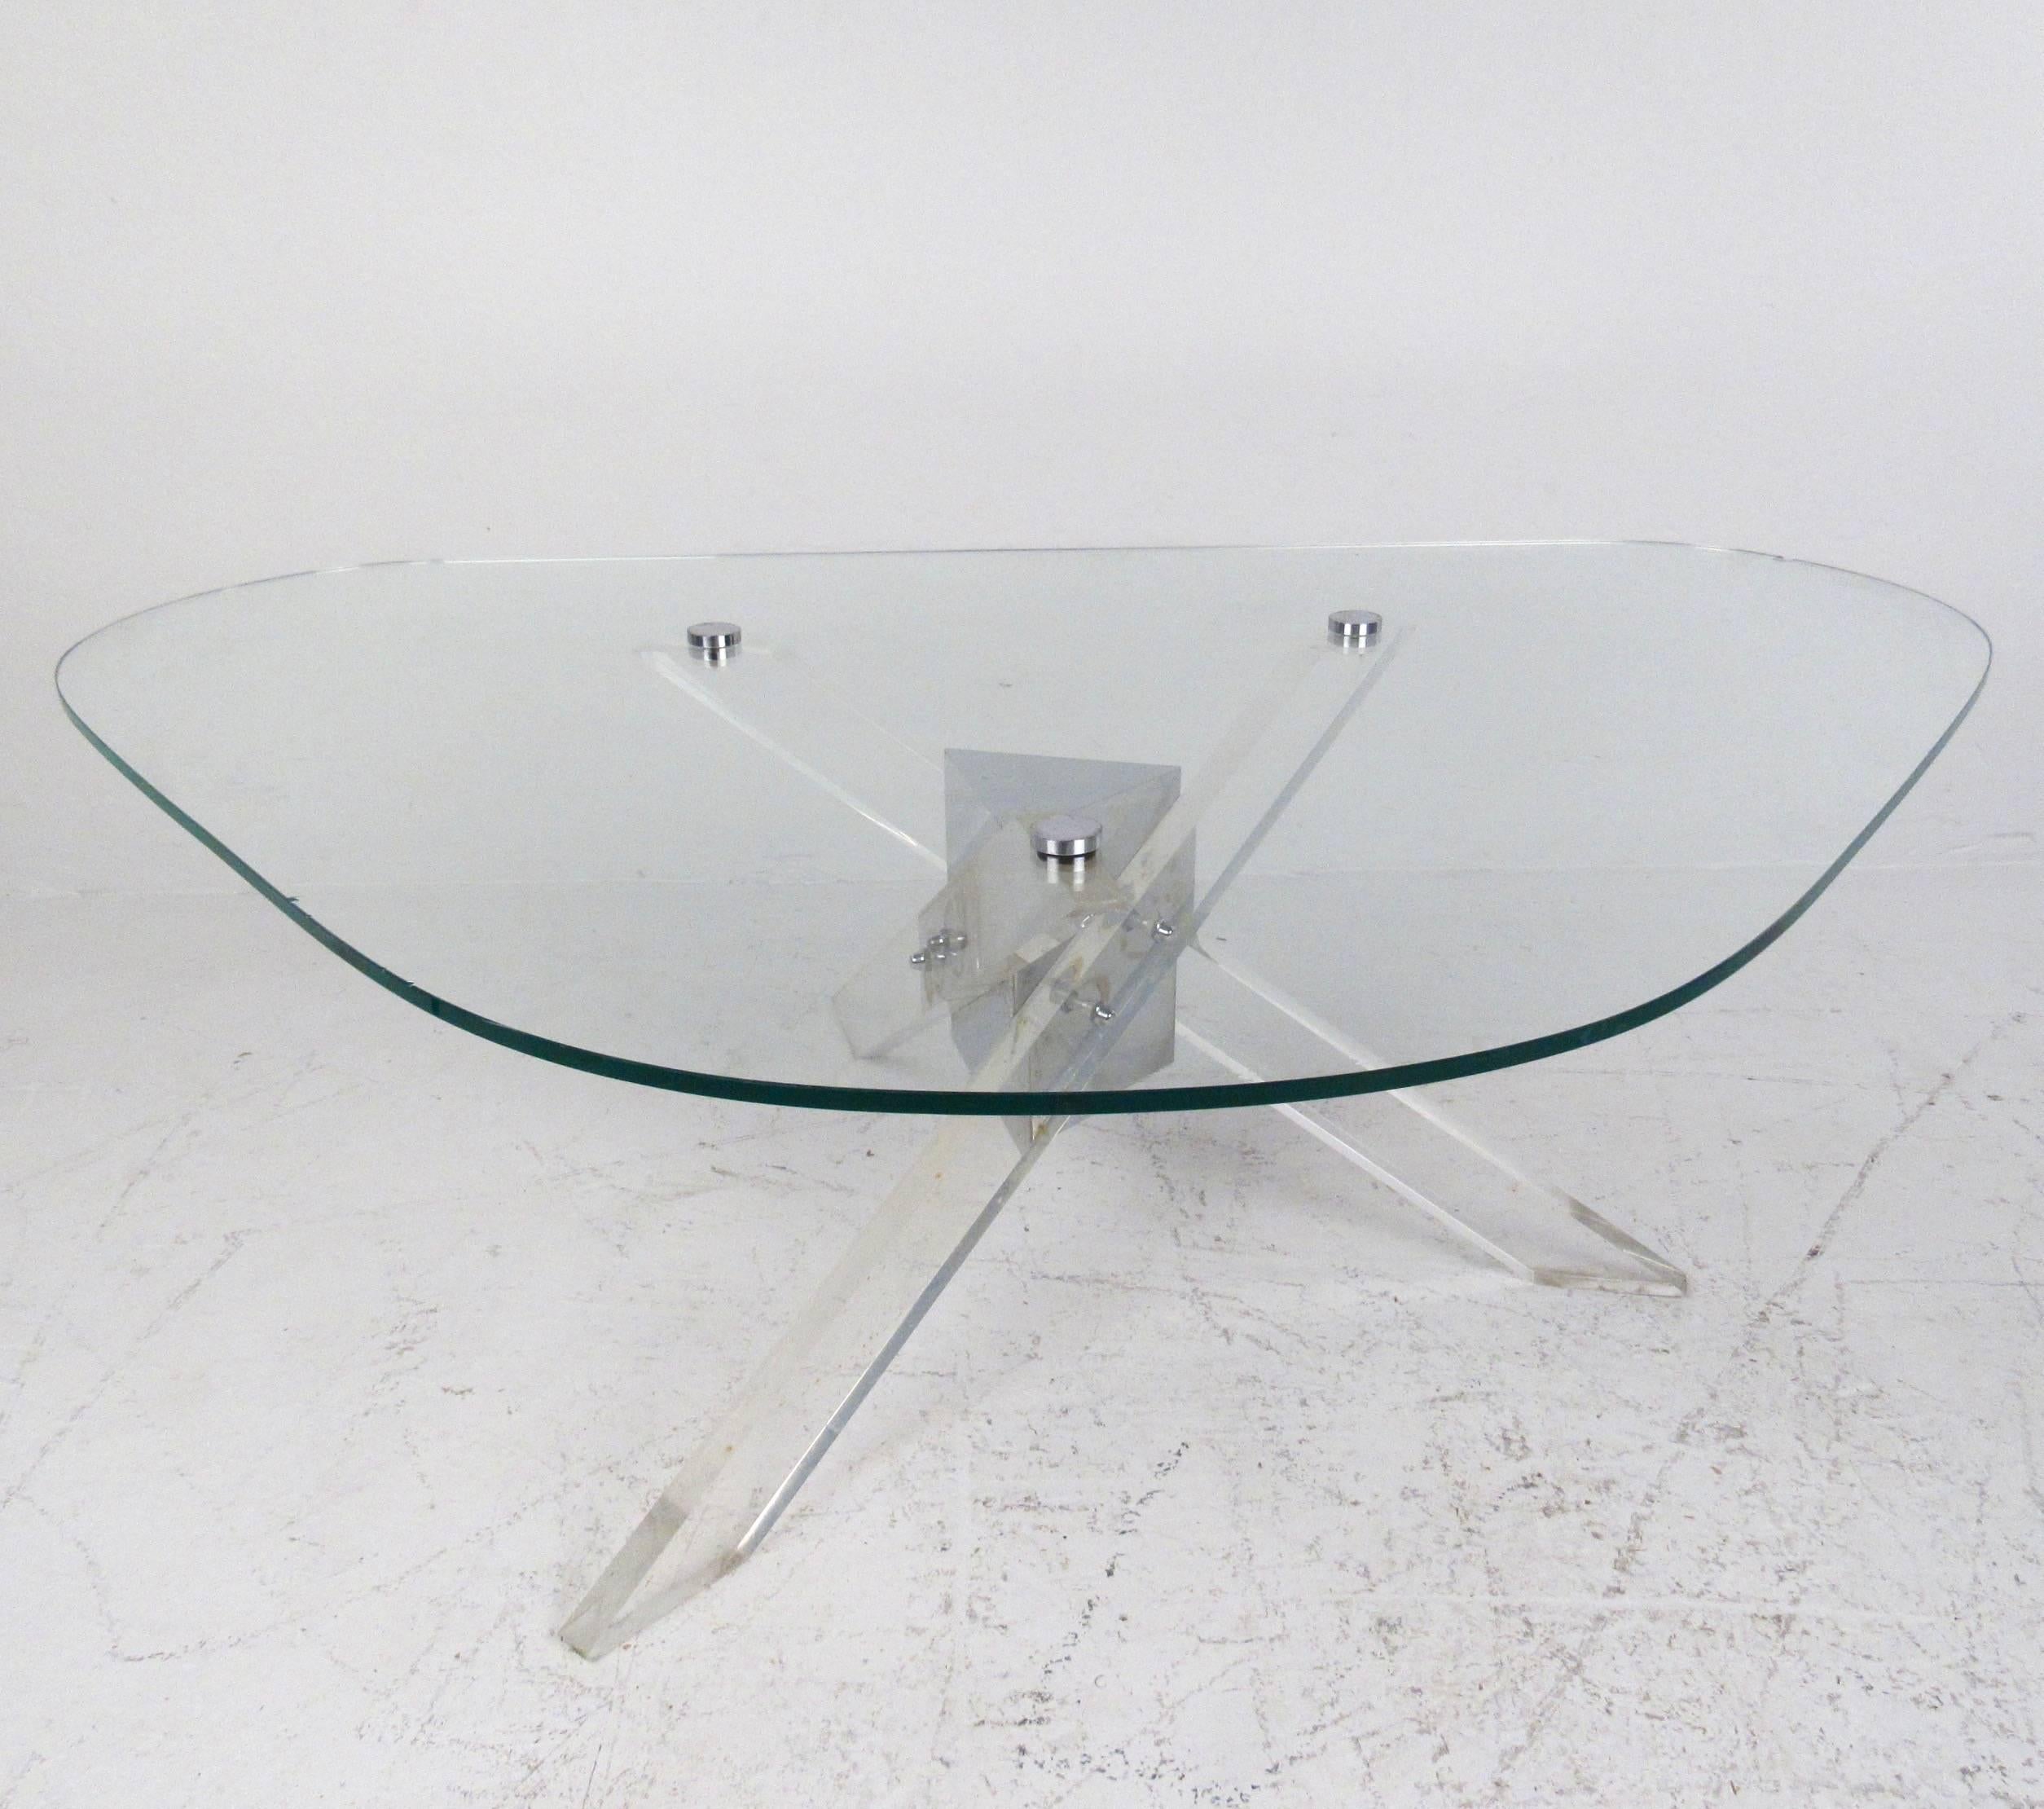 This vintage modern coffee table features a stylish amorphous glass top with jacks-like Lucite base. The sculptural qualities of this Mid-Century cocktail table make this an impressive addition to any interior. Please confirm item location (NY or